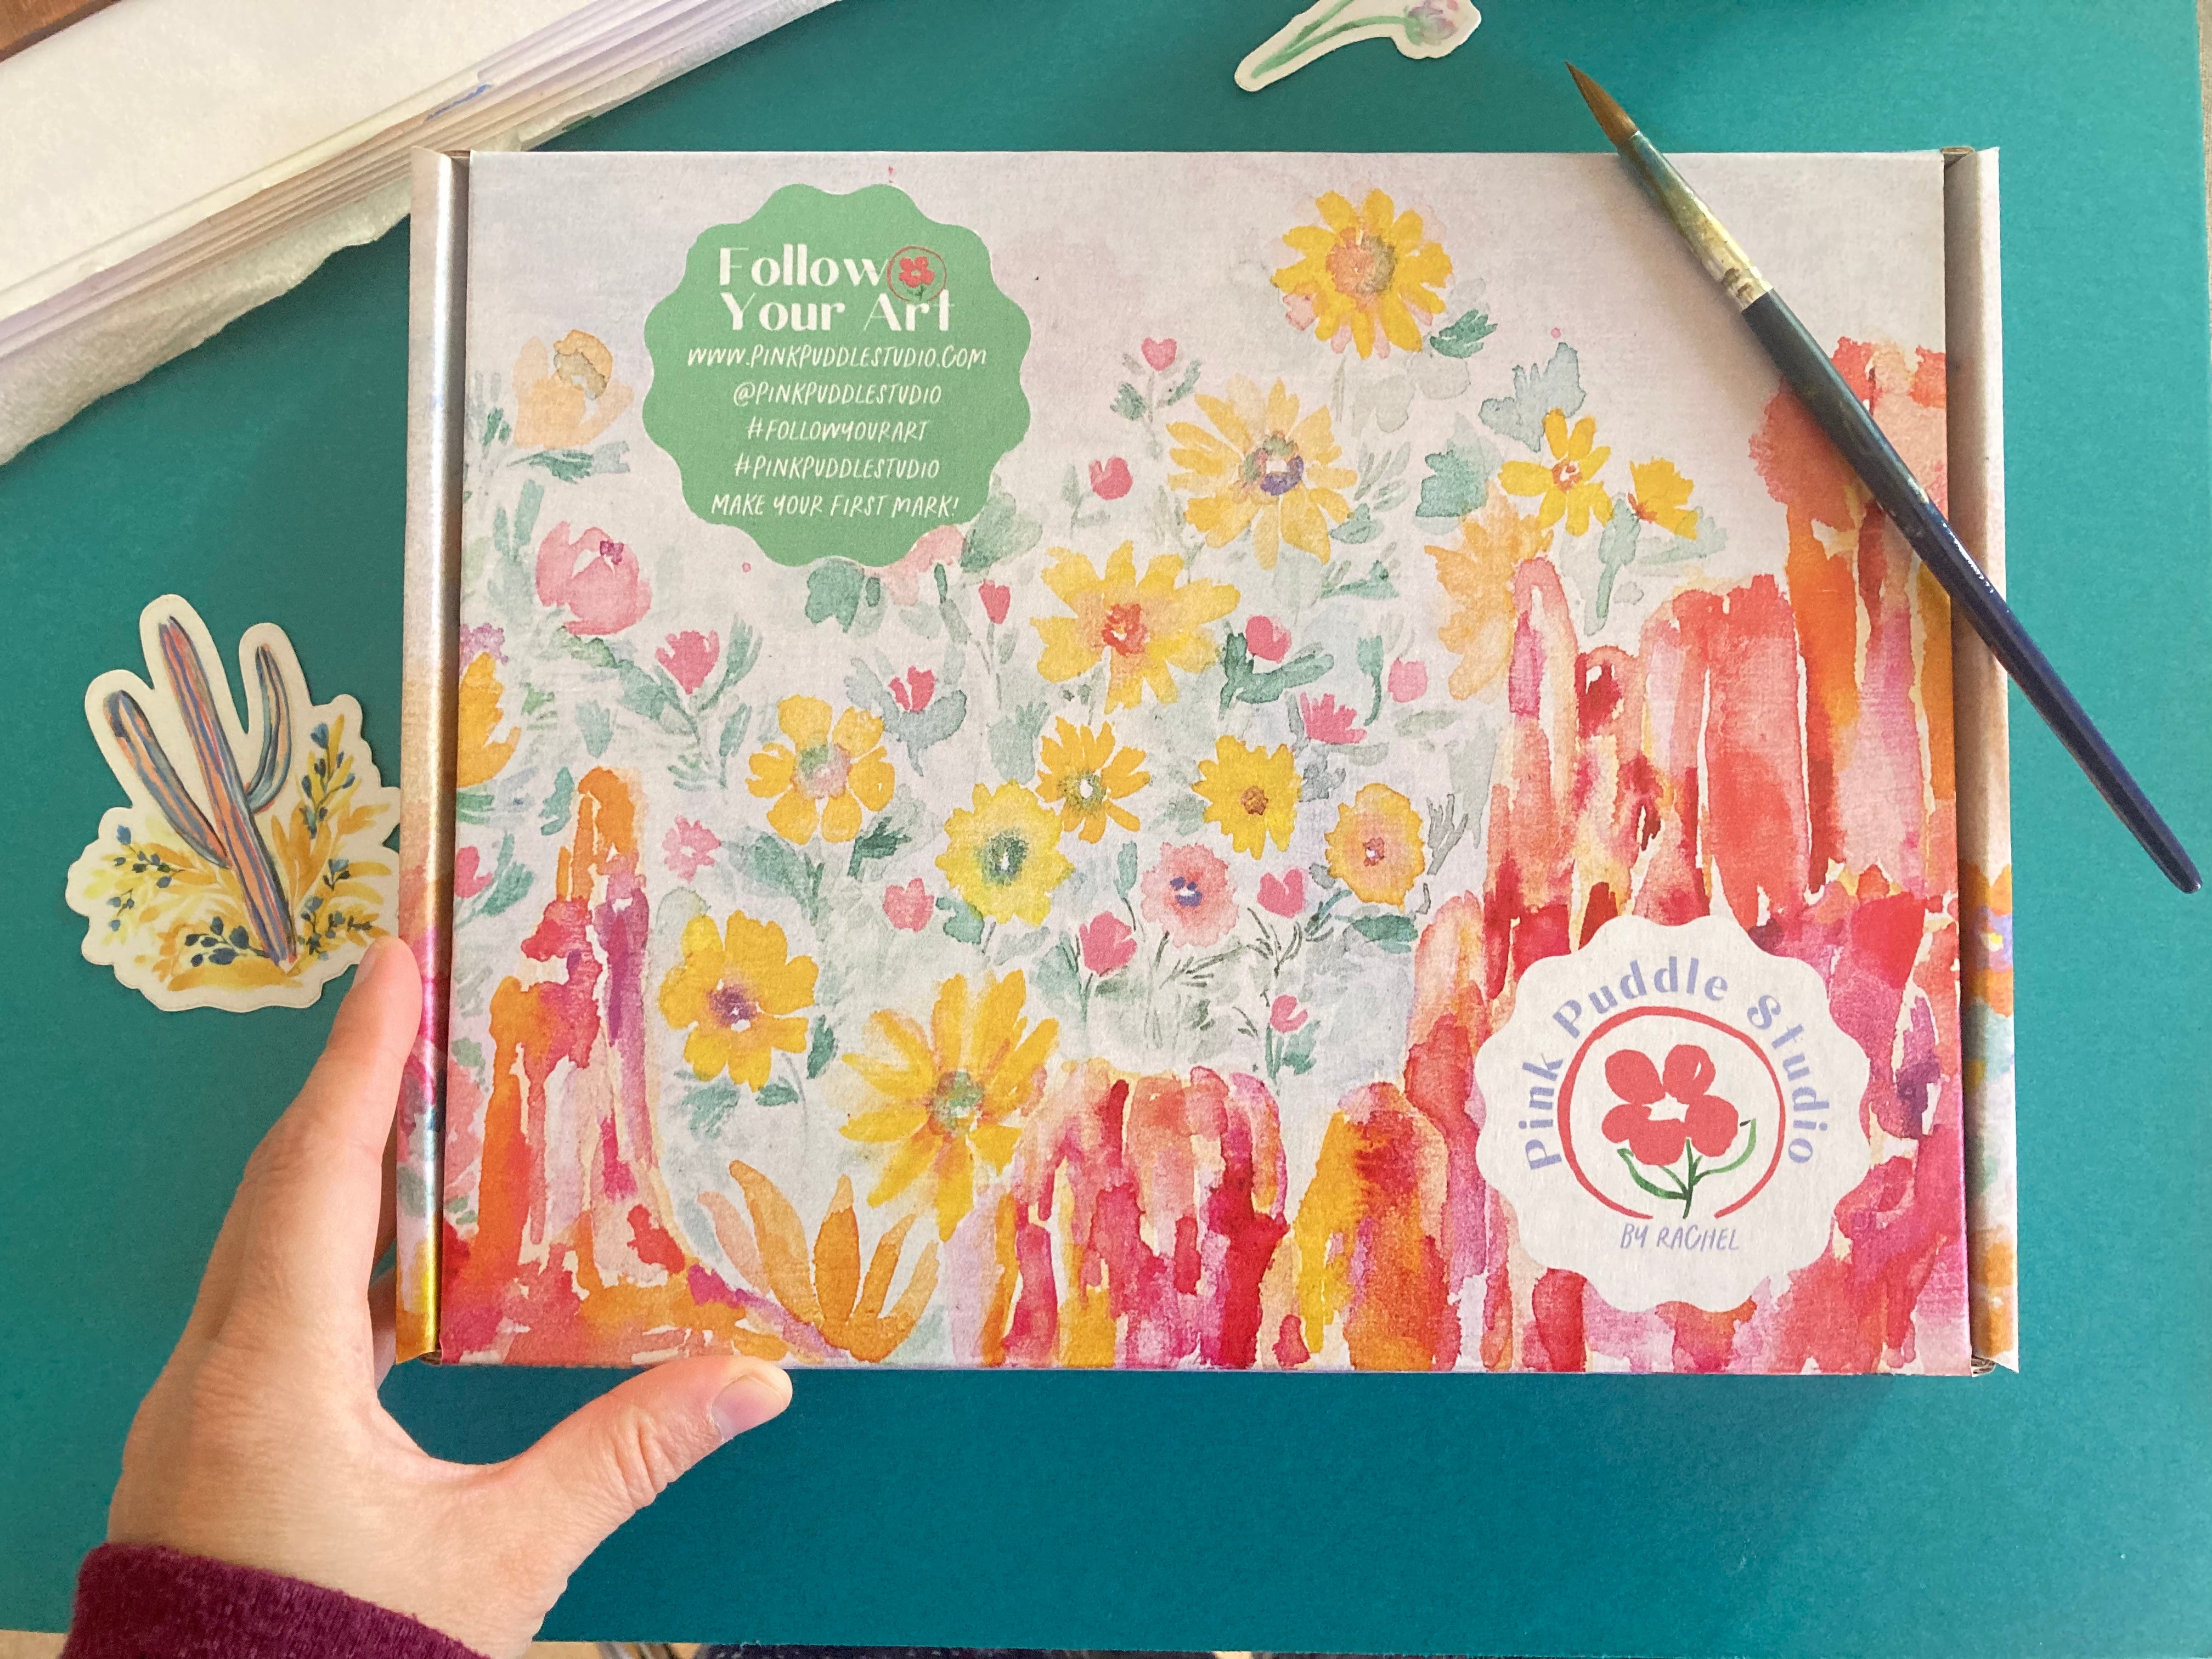 Pink Puddle Studio: Artful Packaging for Watercolor Kit Delights Customers